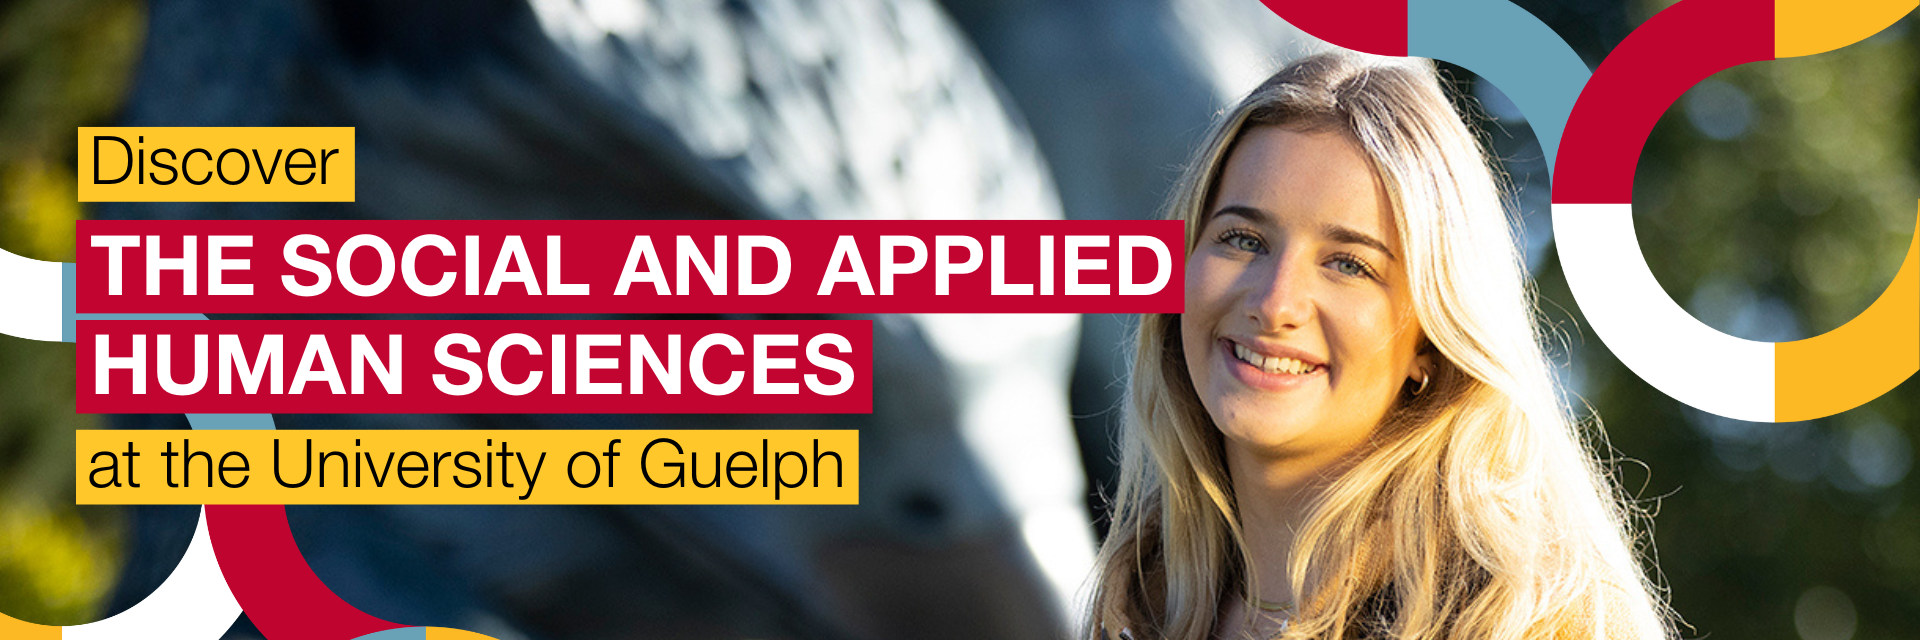 Discover the Social and Applied Human Sciences at the University of Guelph